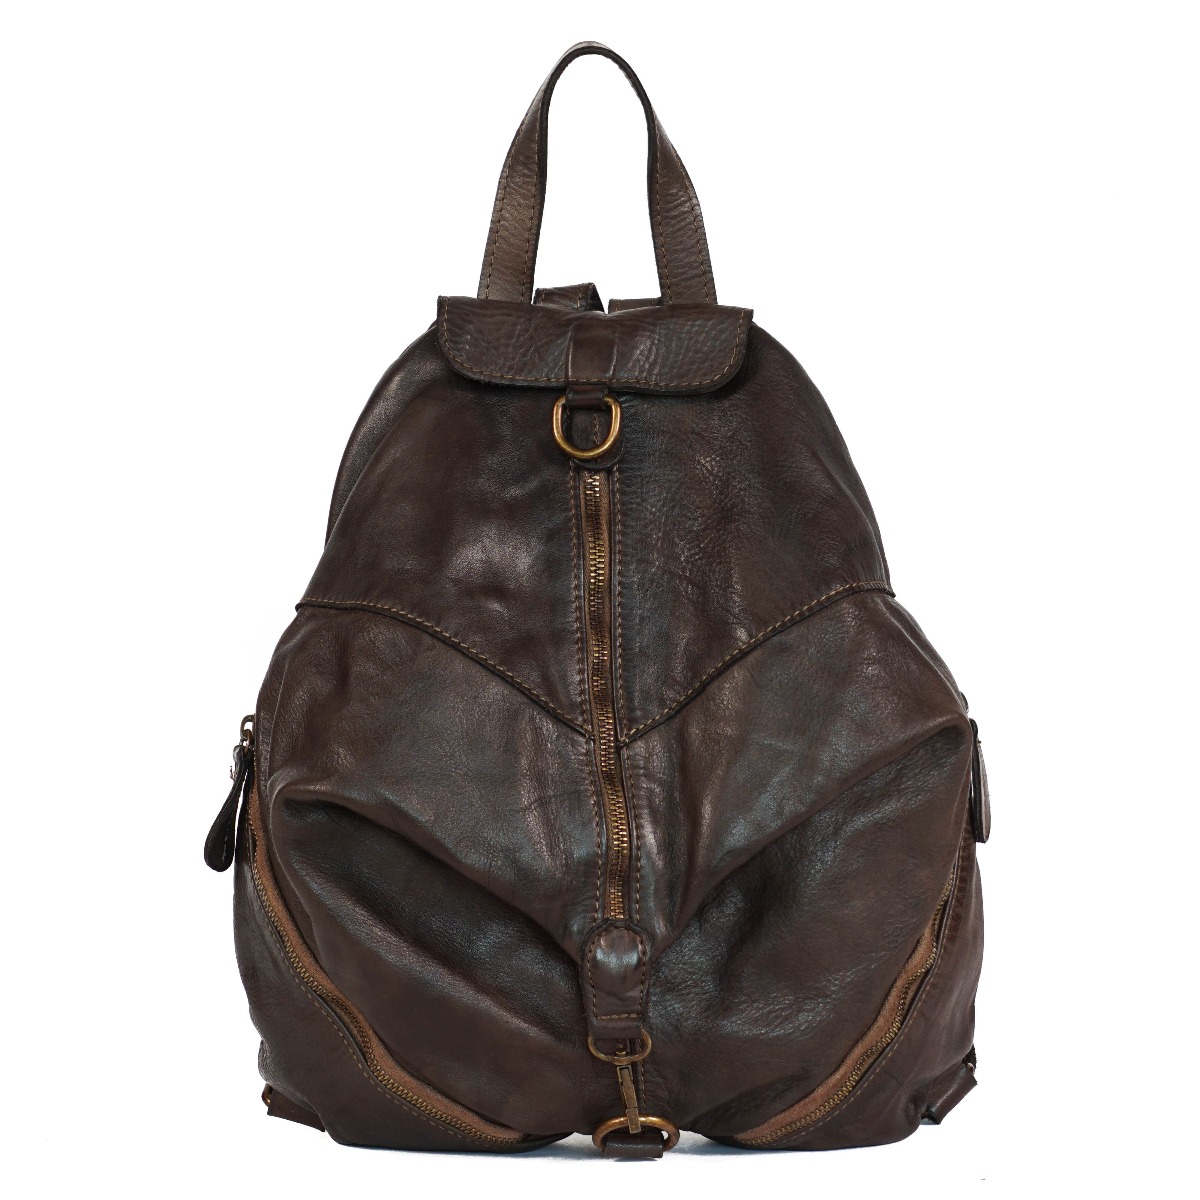 Women soft leather convertible backpack